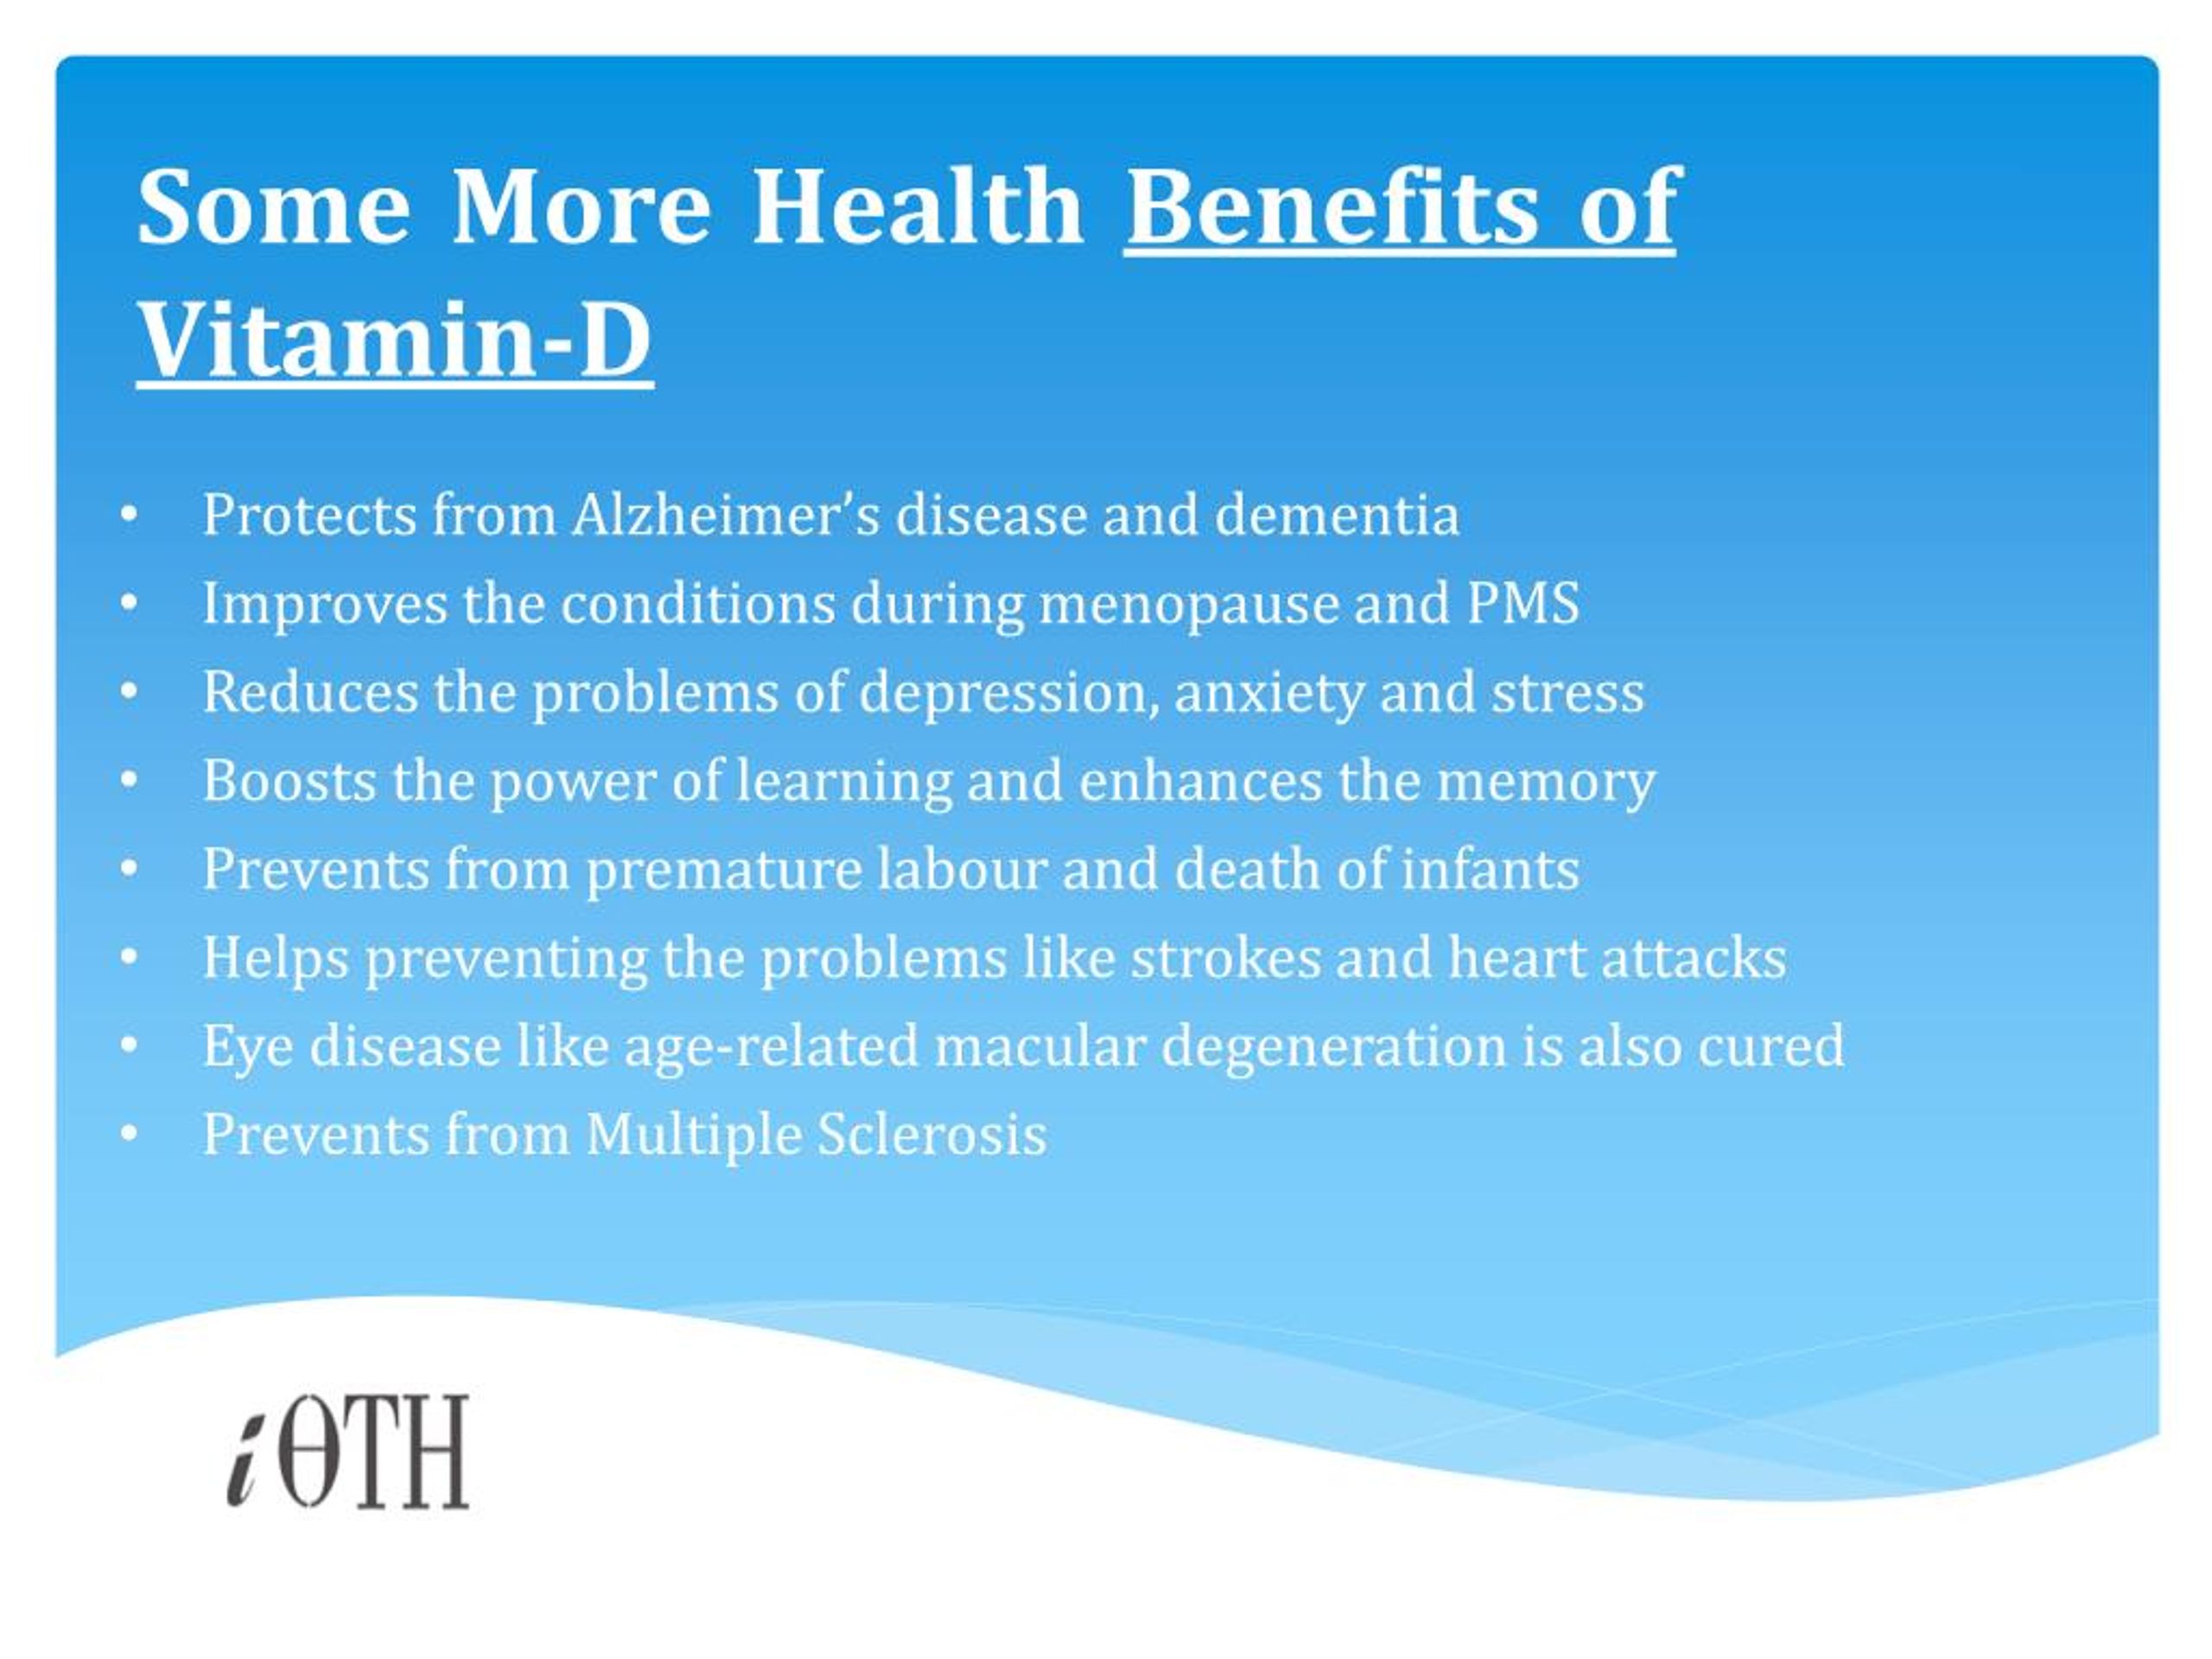 PPT - Best Sources And Benefits Of Vitamin D Supplements - iDaily ...